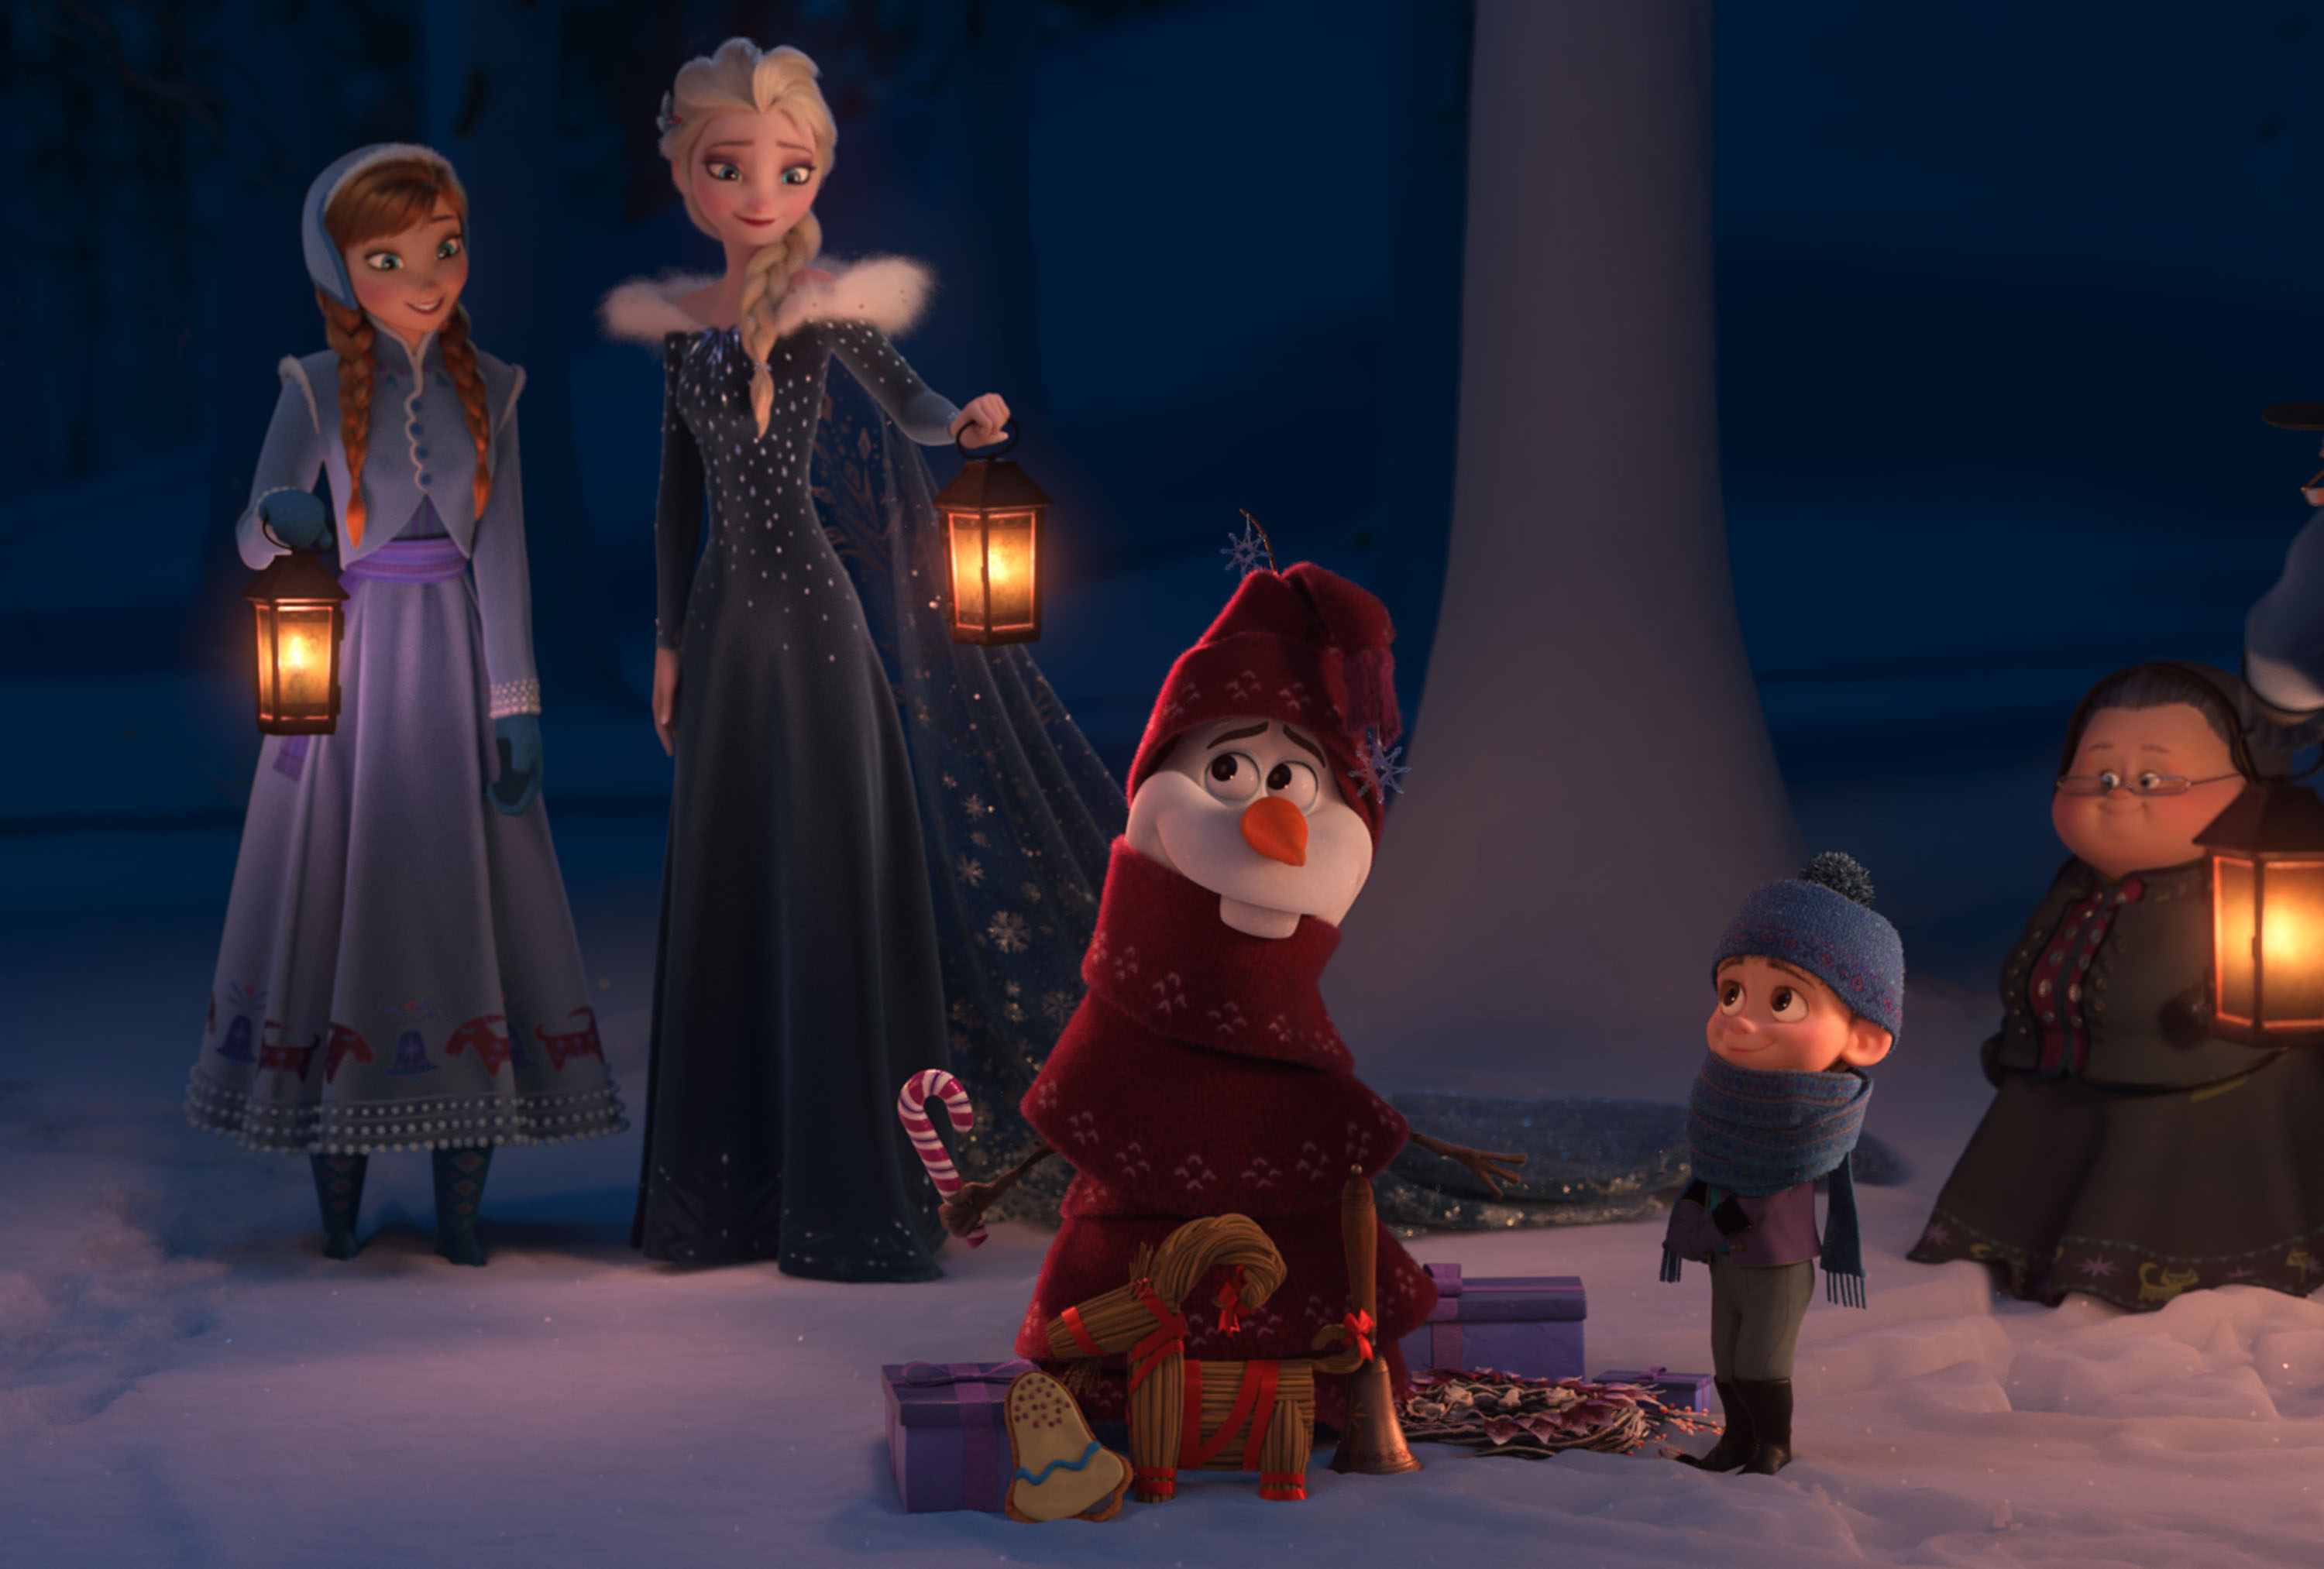 “Olaf’s Frozen Adventure” now available on Digital SD/HD, Movies Anywhere